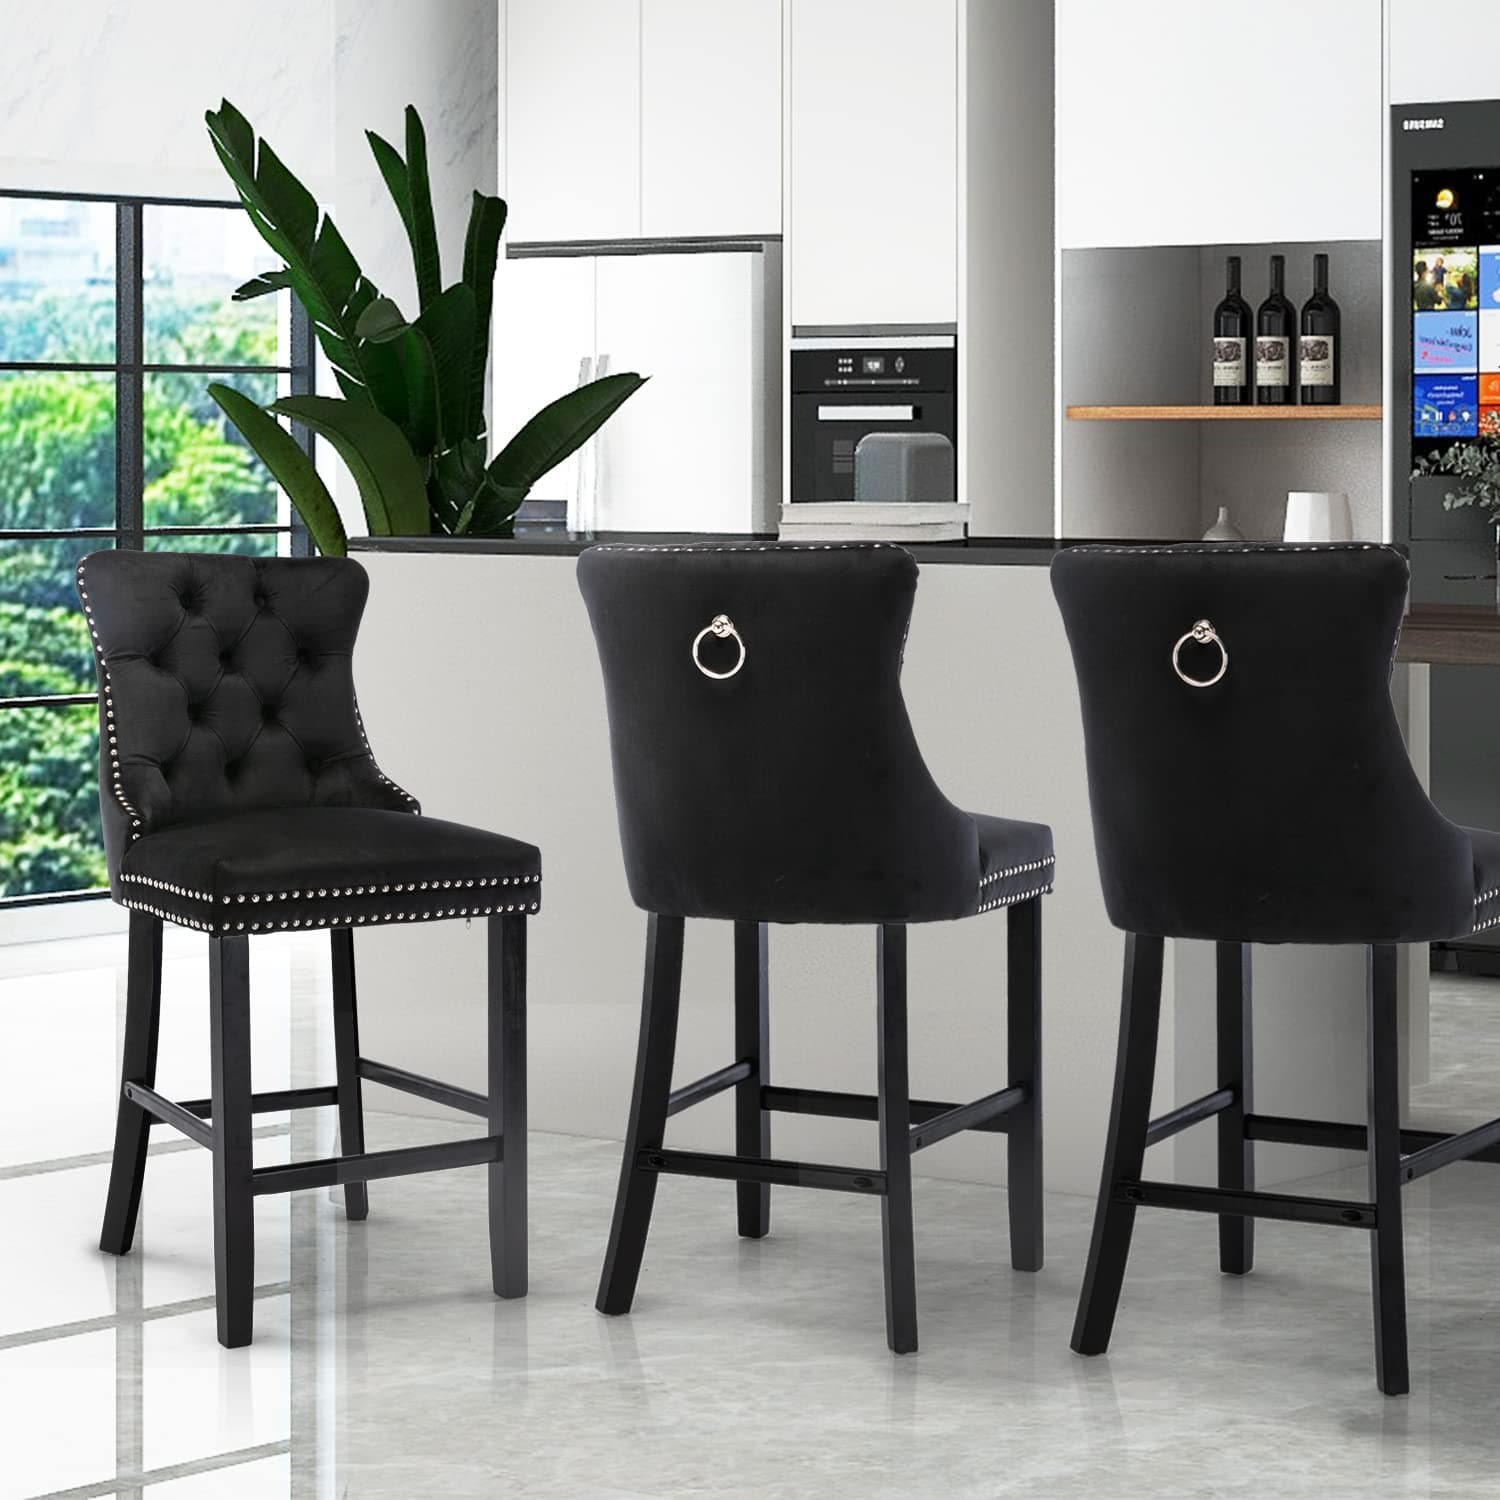 6X Velvet Bar Stools with Studs Trim Wooden Legs Tufted Dining Chairs Kitchen-Furniture &gt; Bar Stools &amp; Chairs-PEROZ Accessories